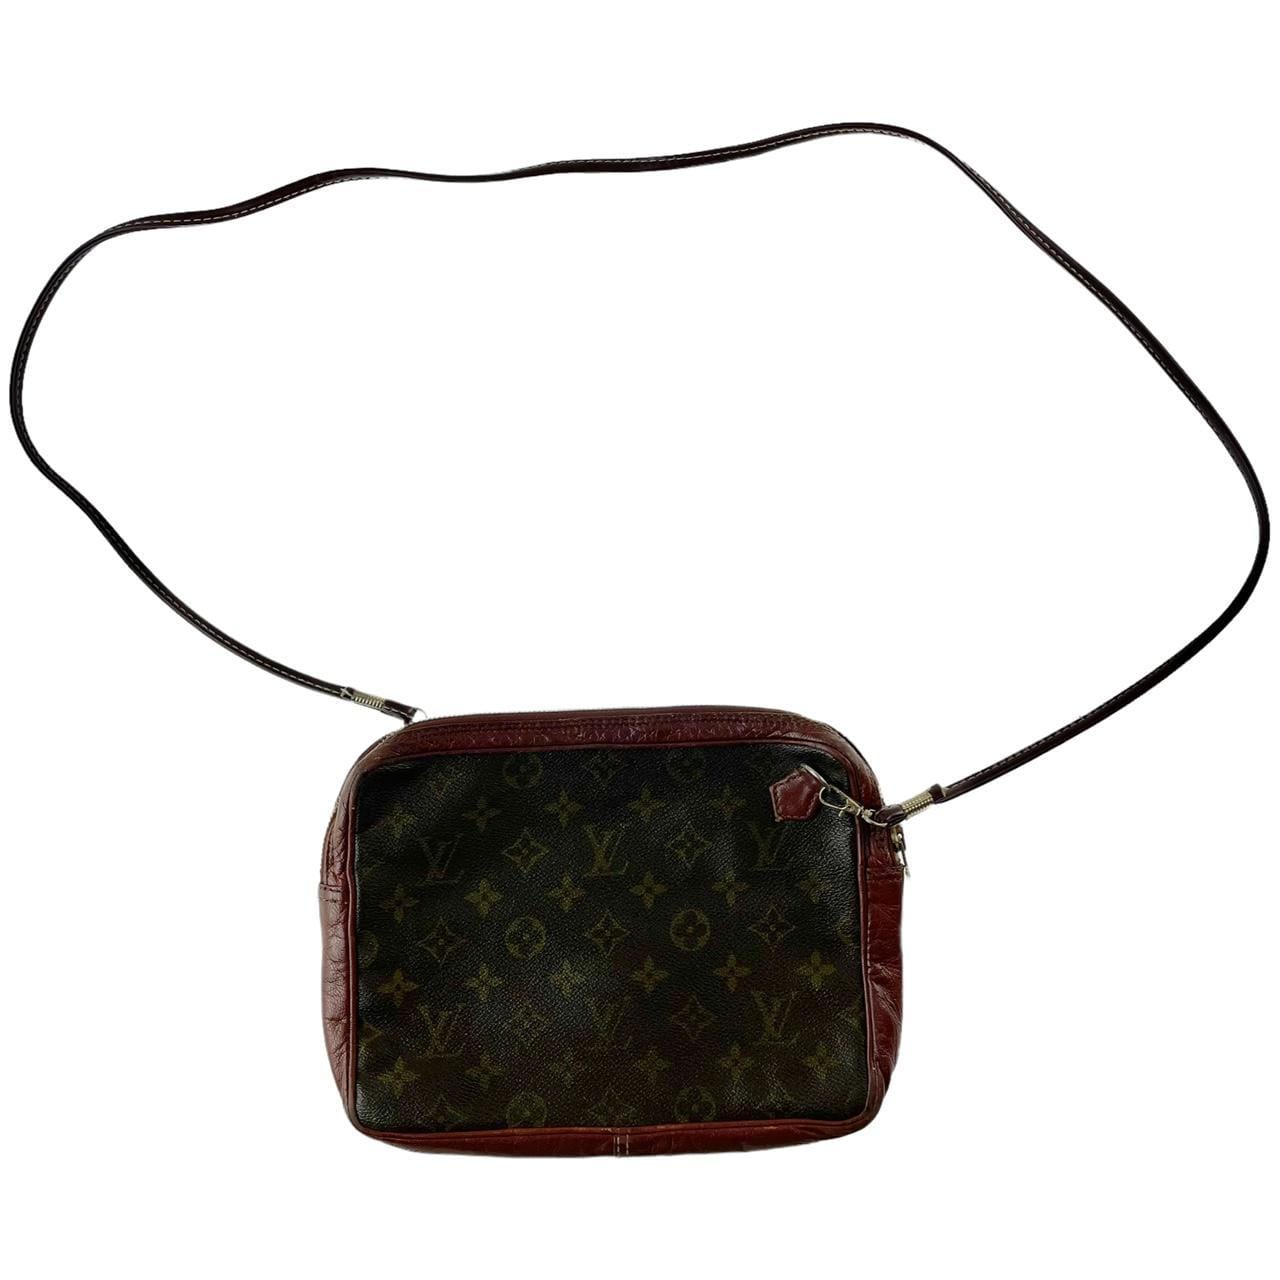 Authentic Second Hand Louis Vuitton Monogram Crossbody Bag PSS69000006   THE FIFTH COLLECTION